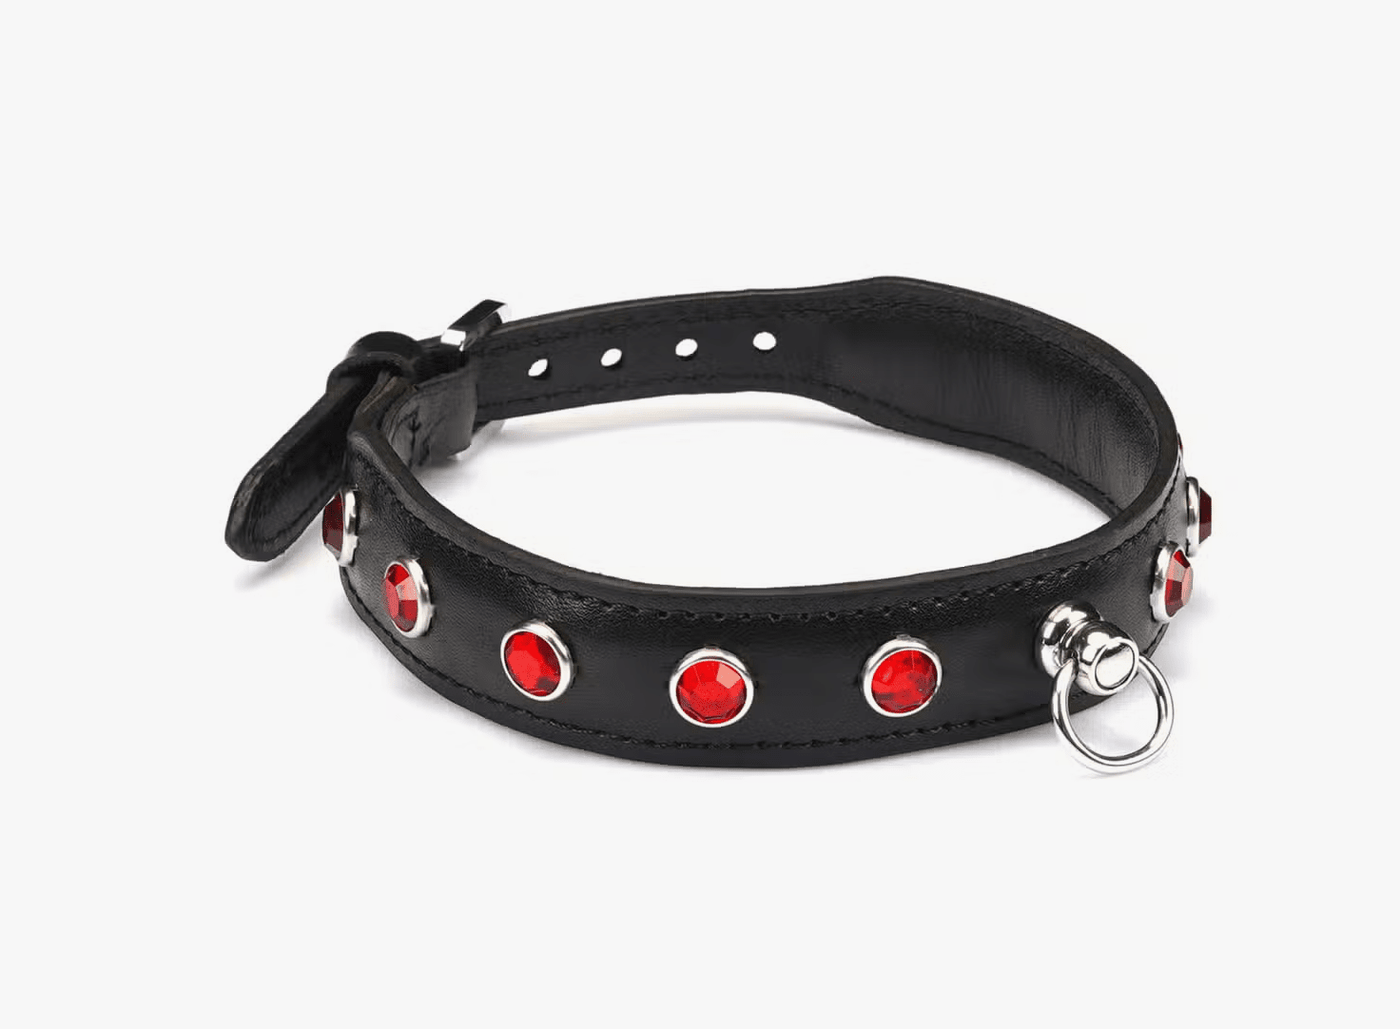 Premium Leather Choker with Red Gems by Liebe Seele - Hamilton Park Electronics